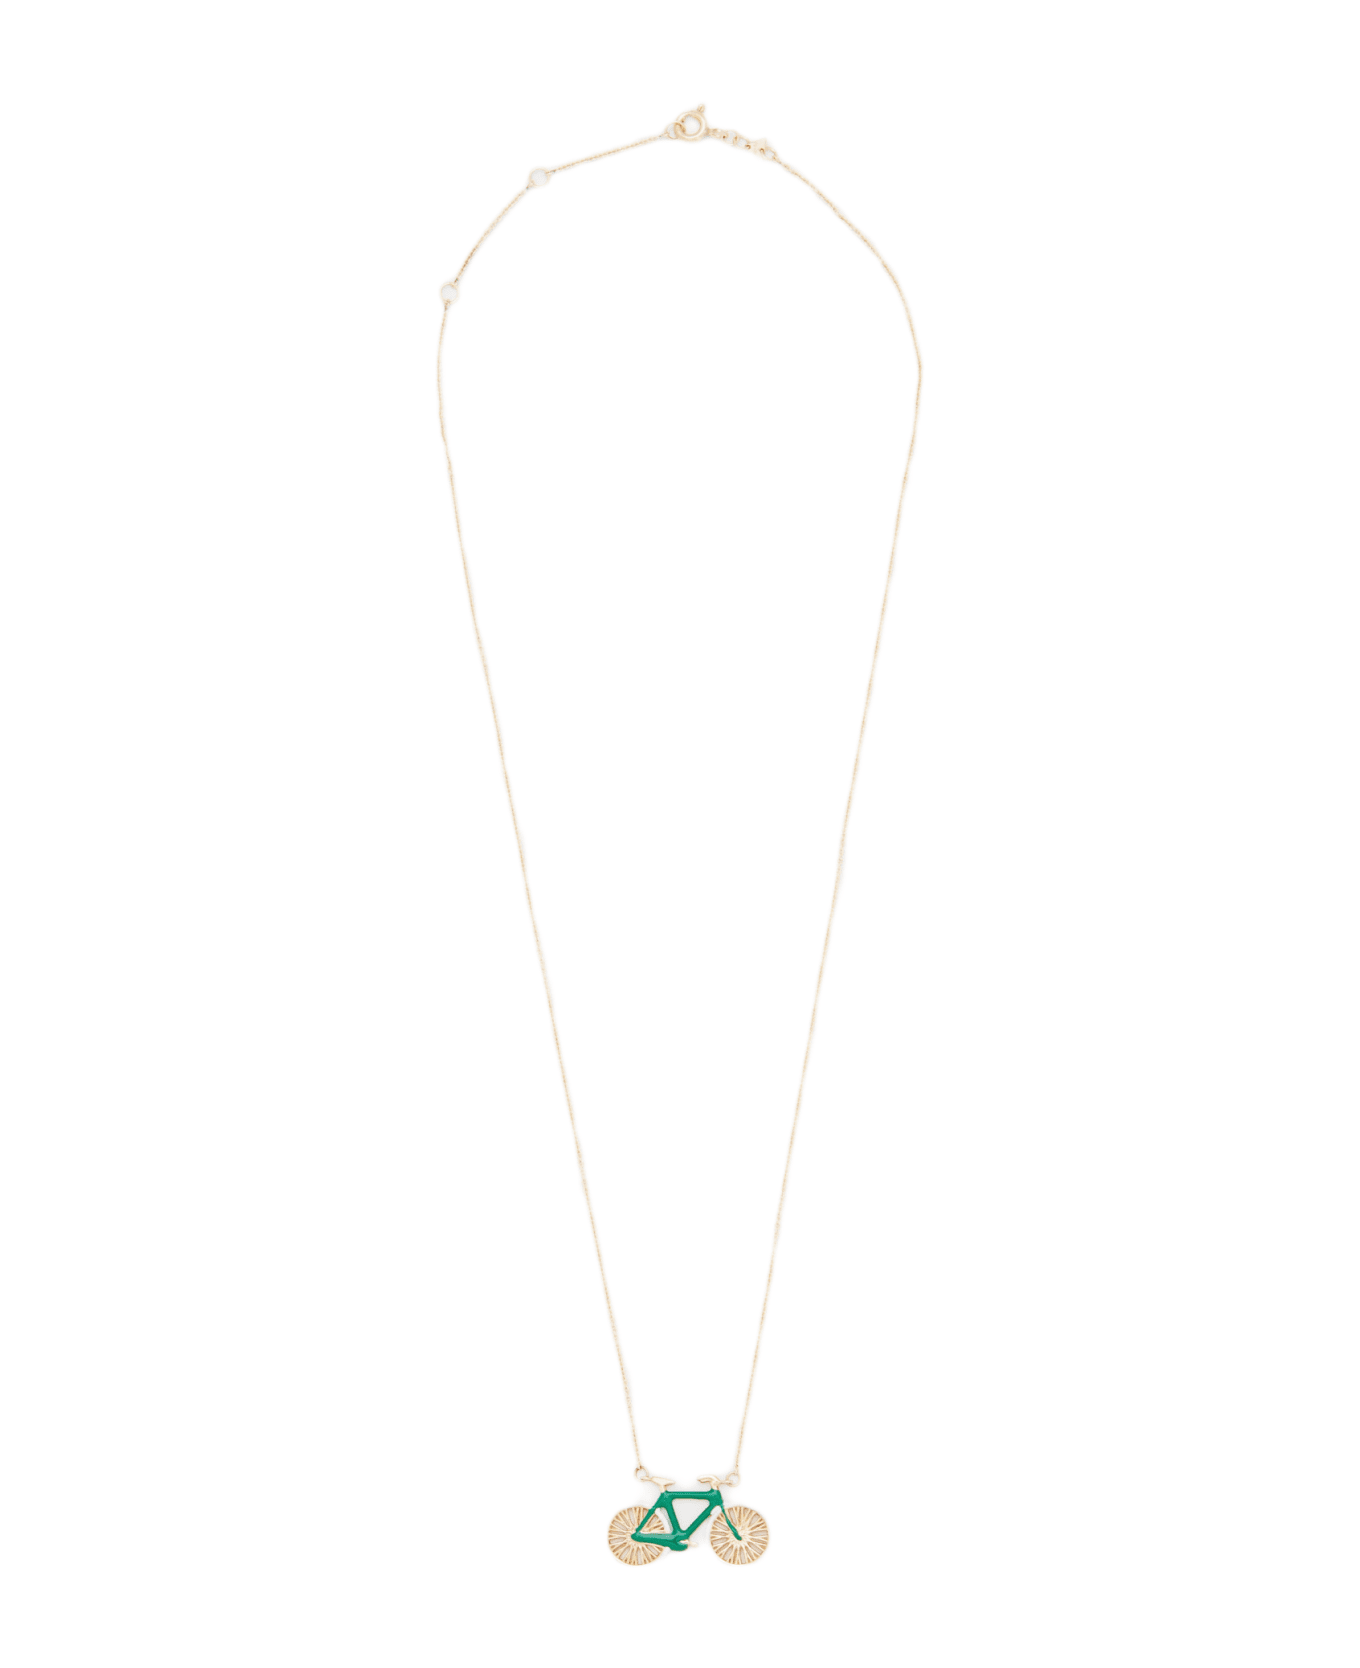 Aliita 9k Gold Bici Polished Necklace - Pistacchio Green+white/ ネックレス